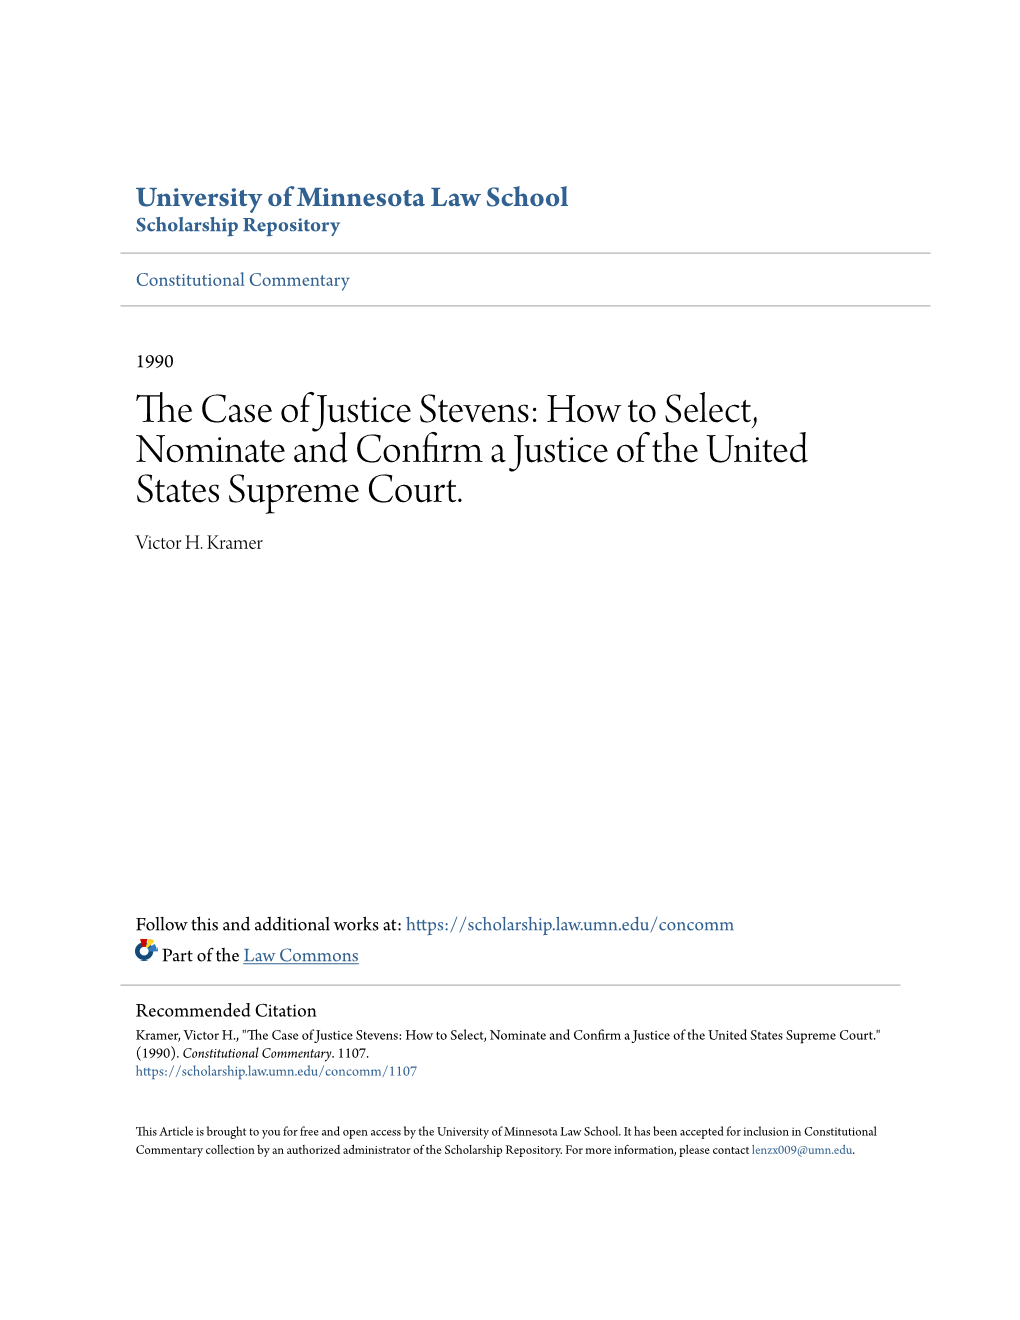 The Case of Justice Stevens: How to Select, Nominate and Confirm a Justice of the United States Supreme Court